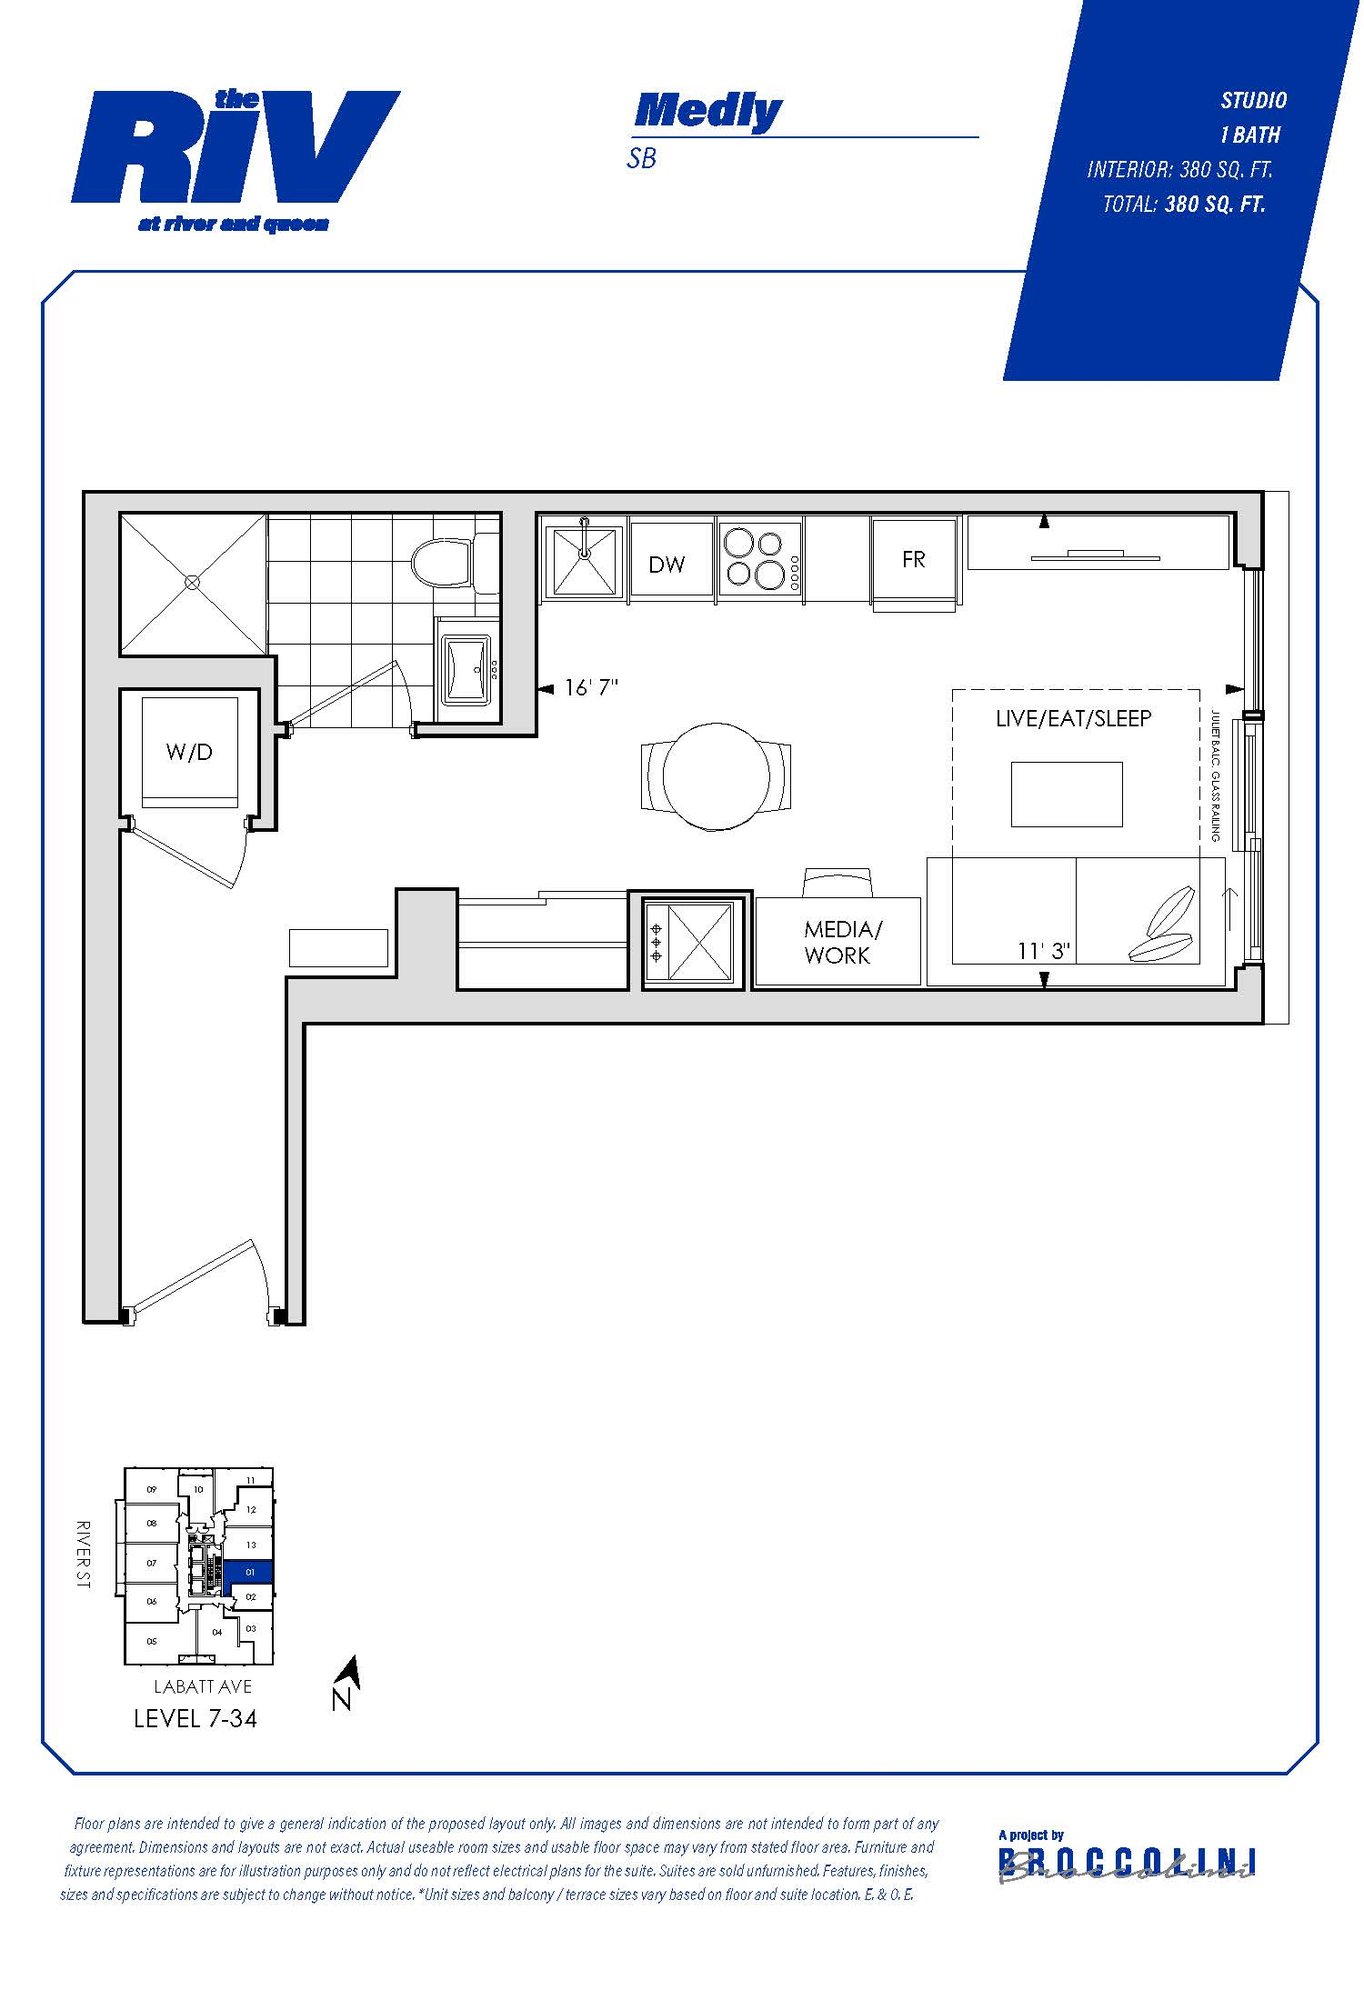 Floor plan for Medly studio unit in The Riv